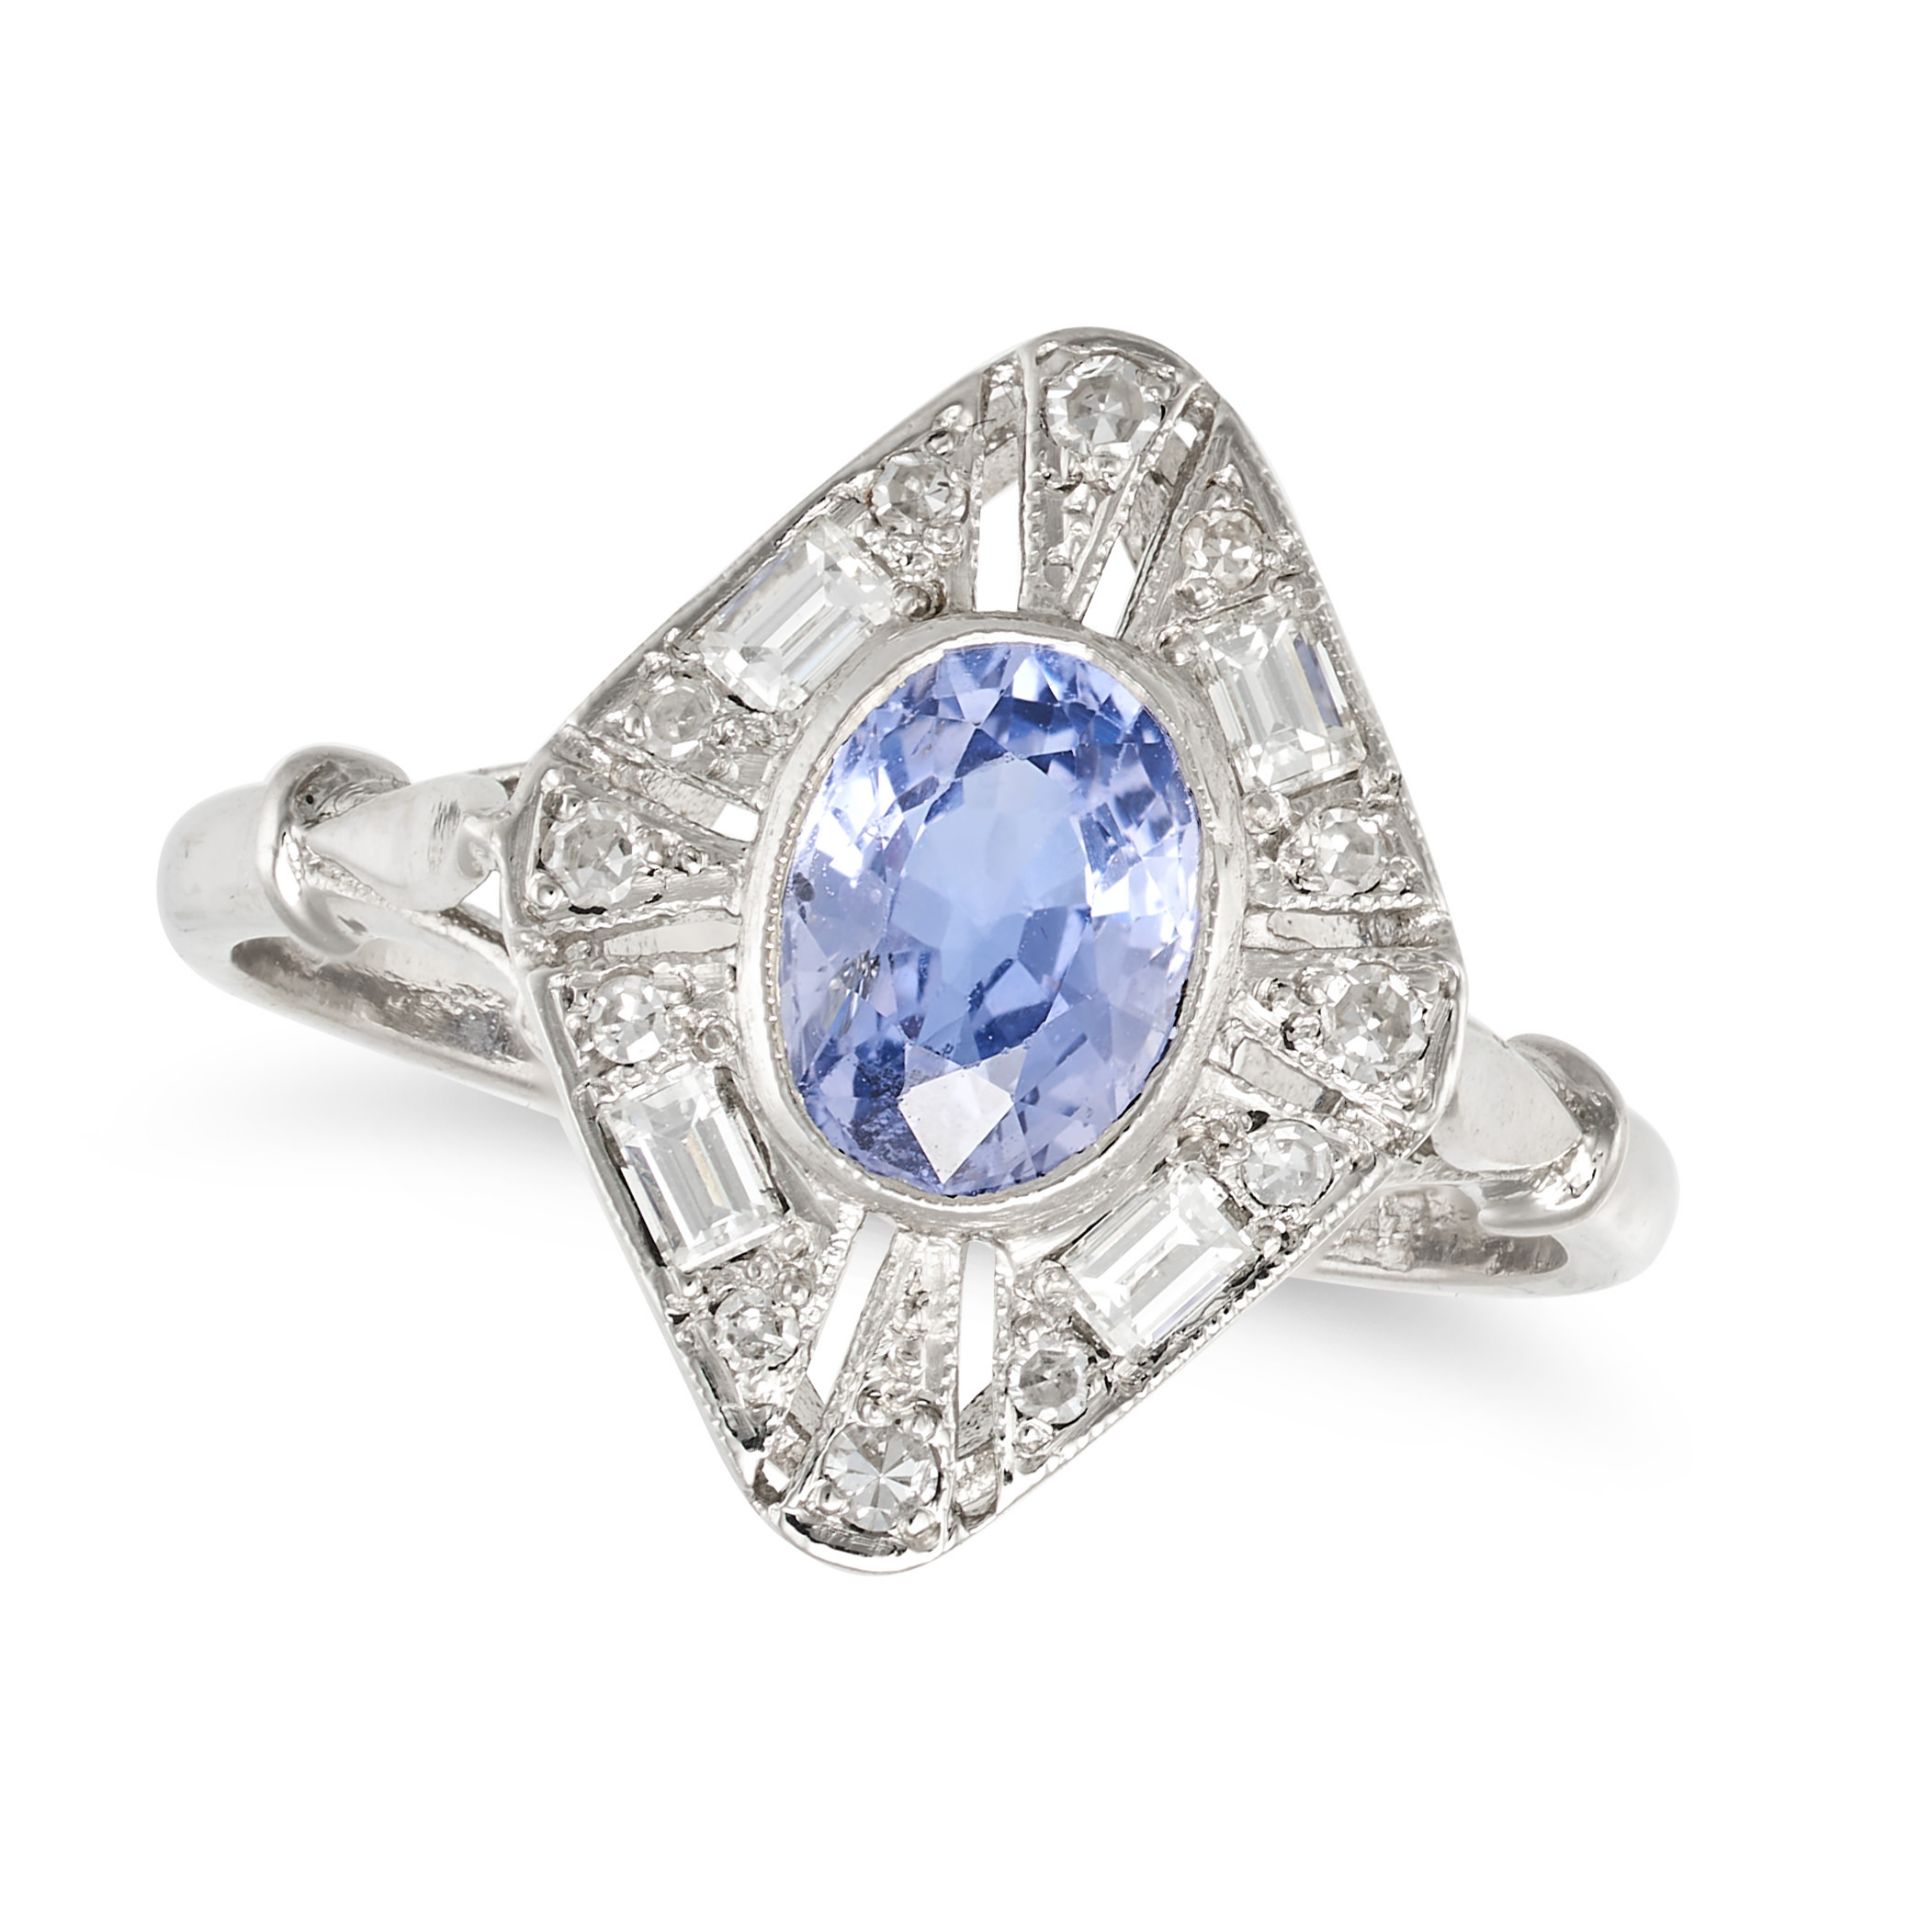 NO RESERVE - A SAPPHIRE AND DIAMOND DRESS RING in platinum, set with an oval cut sapphire of appr...